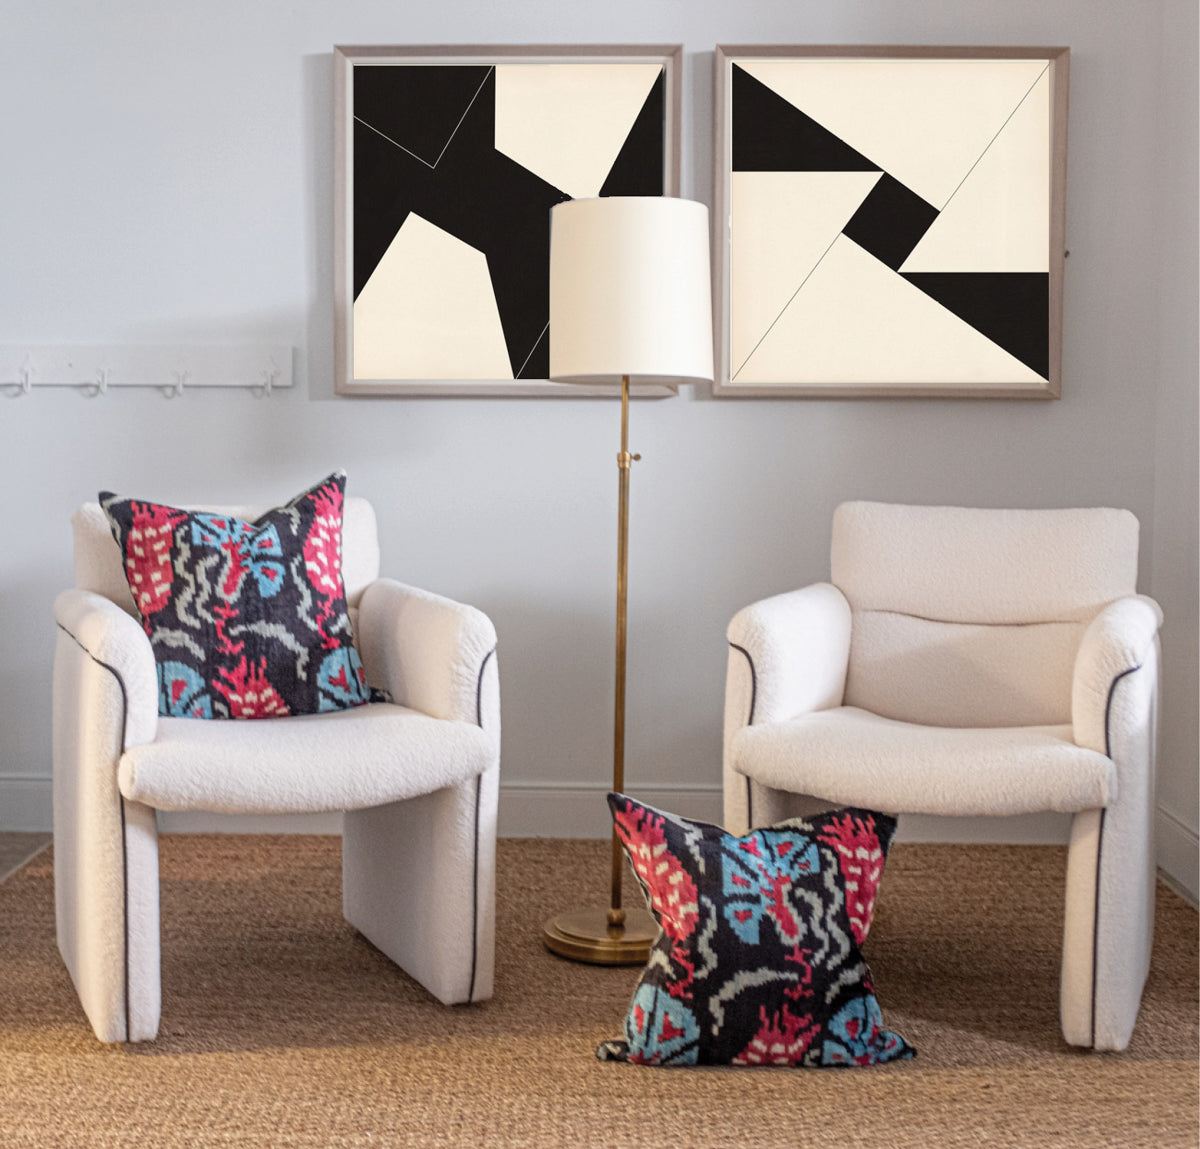 pair of vintage chairs underneath black and white artwork and a floor lamp